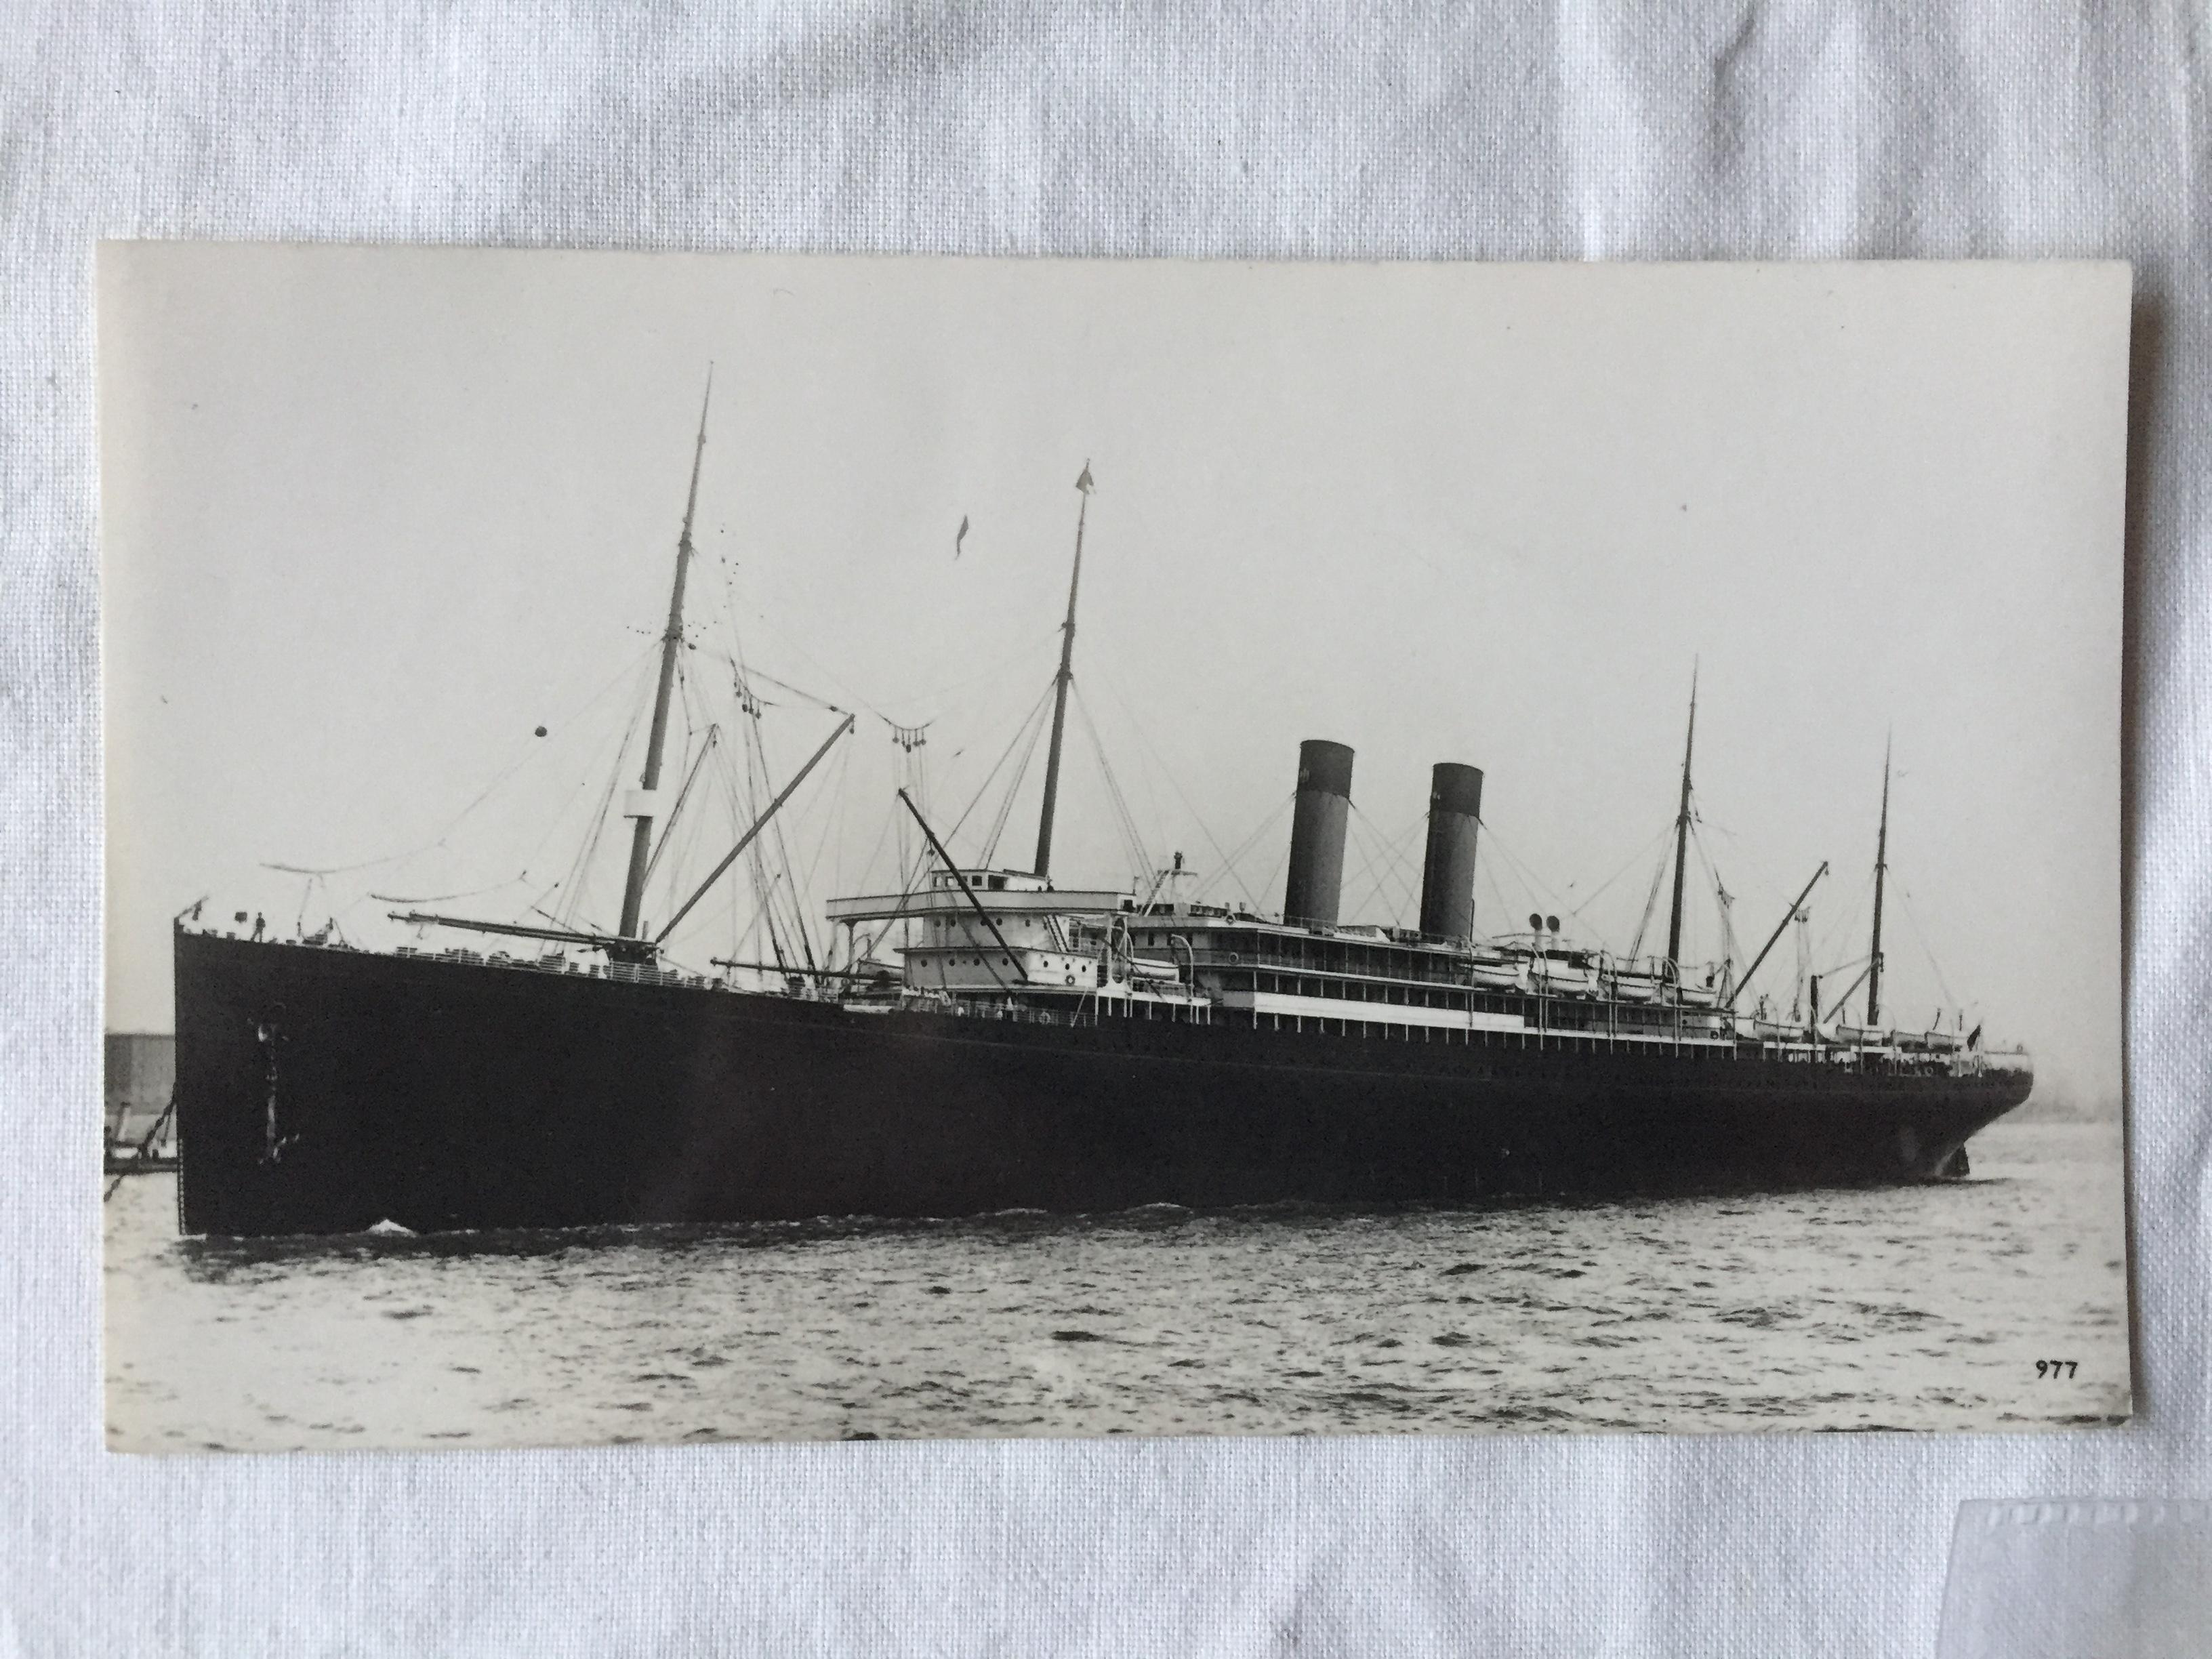 B/W PHOTOGRAPH OF THE WHITE STAR LINE VESSEL THE CELTIC